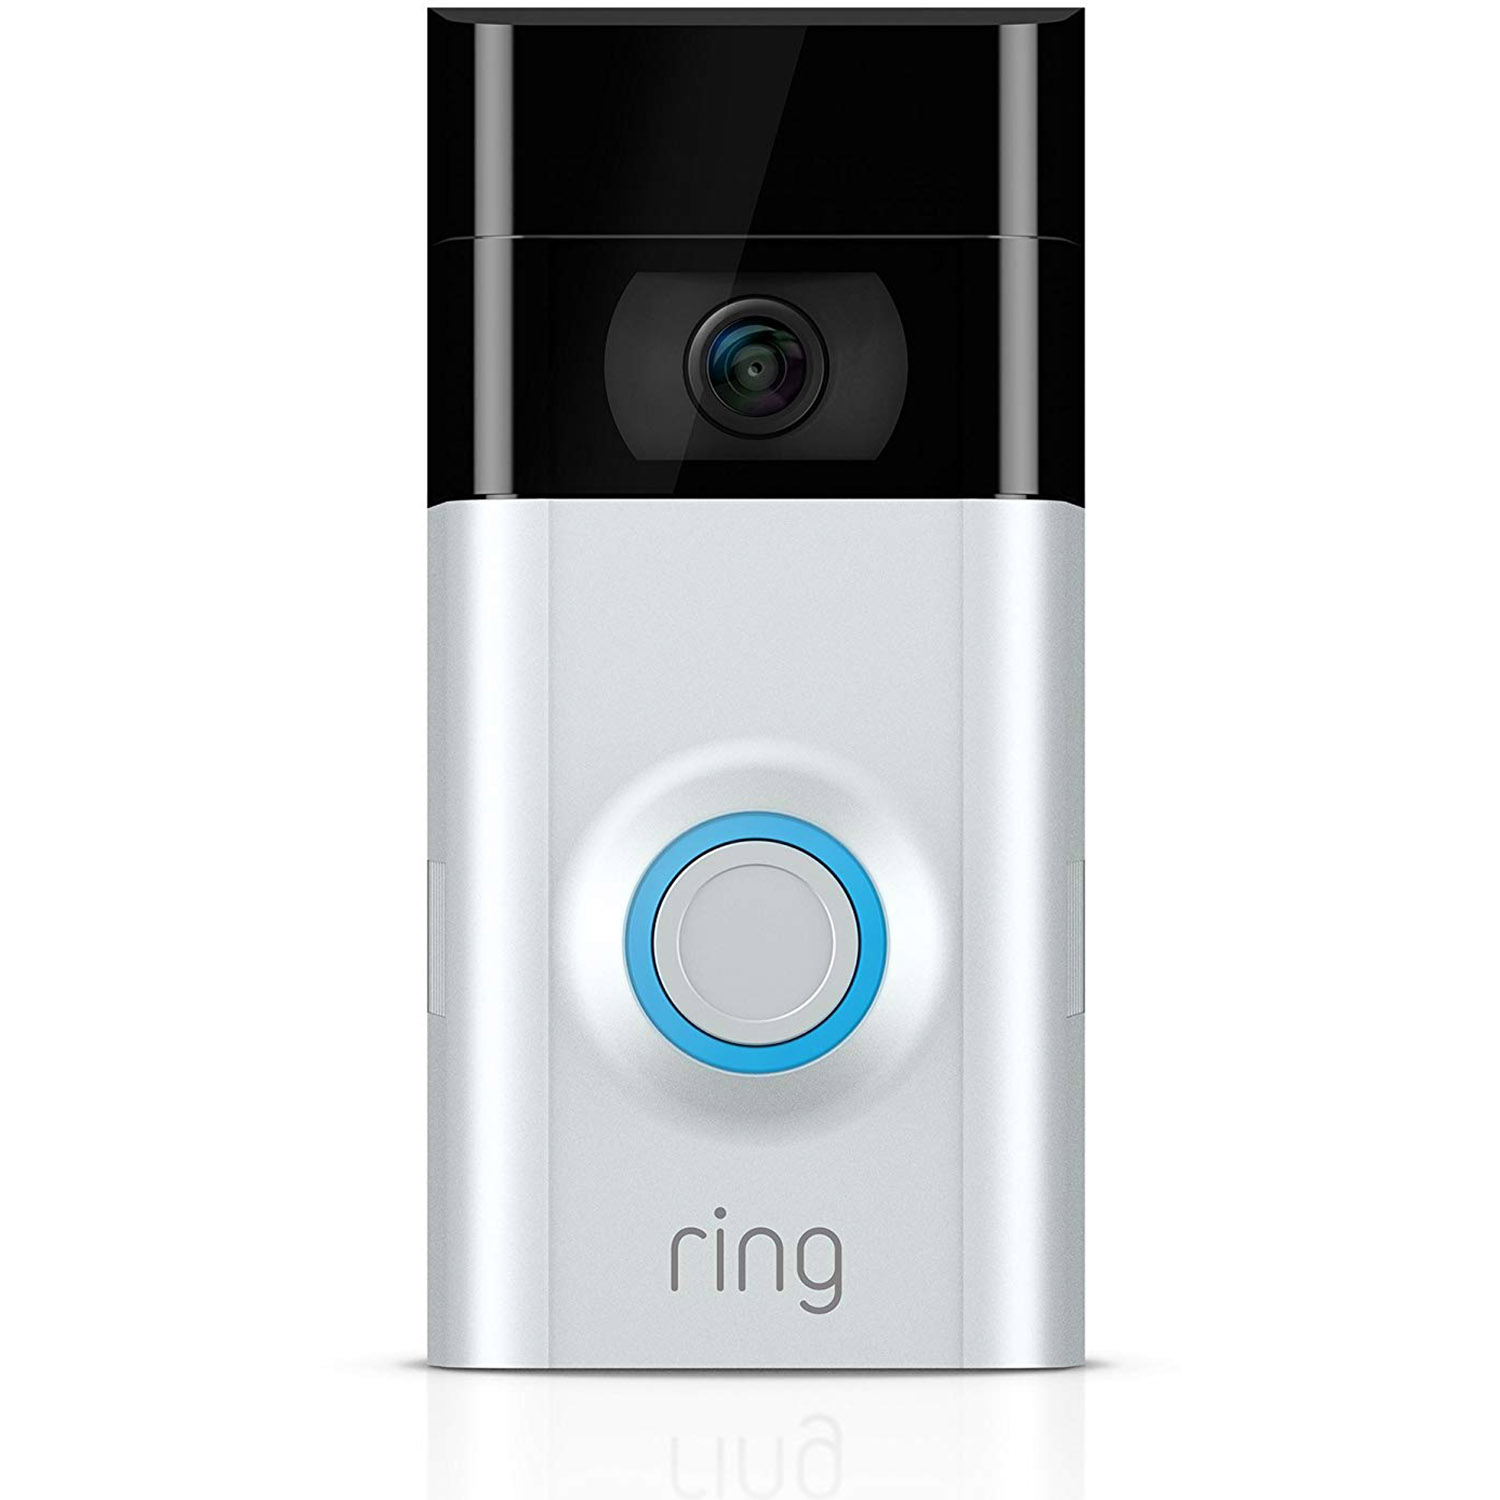 Ring 2 Wi-Fi Enabled Security Video Doorbell, Works with Alexa, Satin Nickel Finish - Includes Free Cleaning Cloth - image 1 of 5